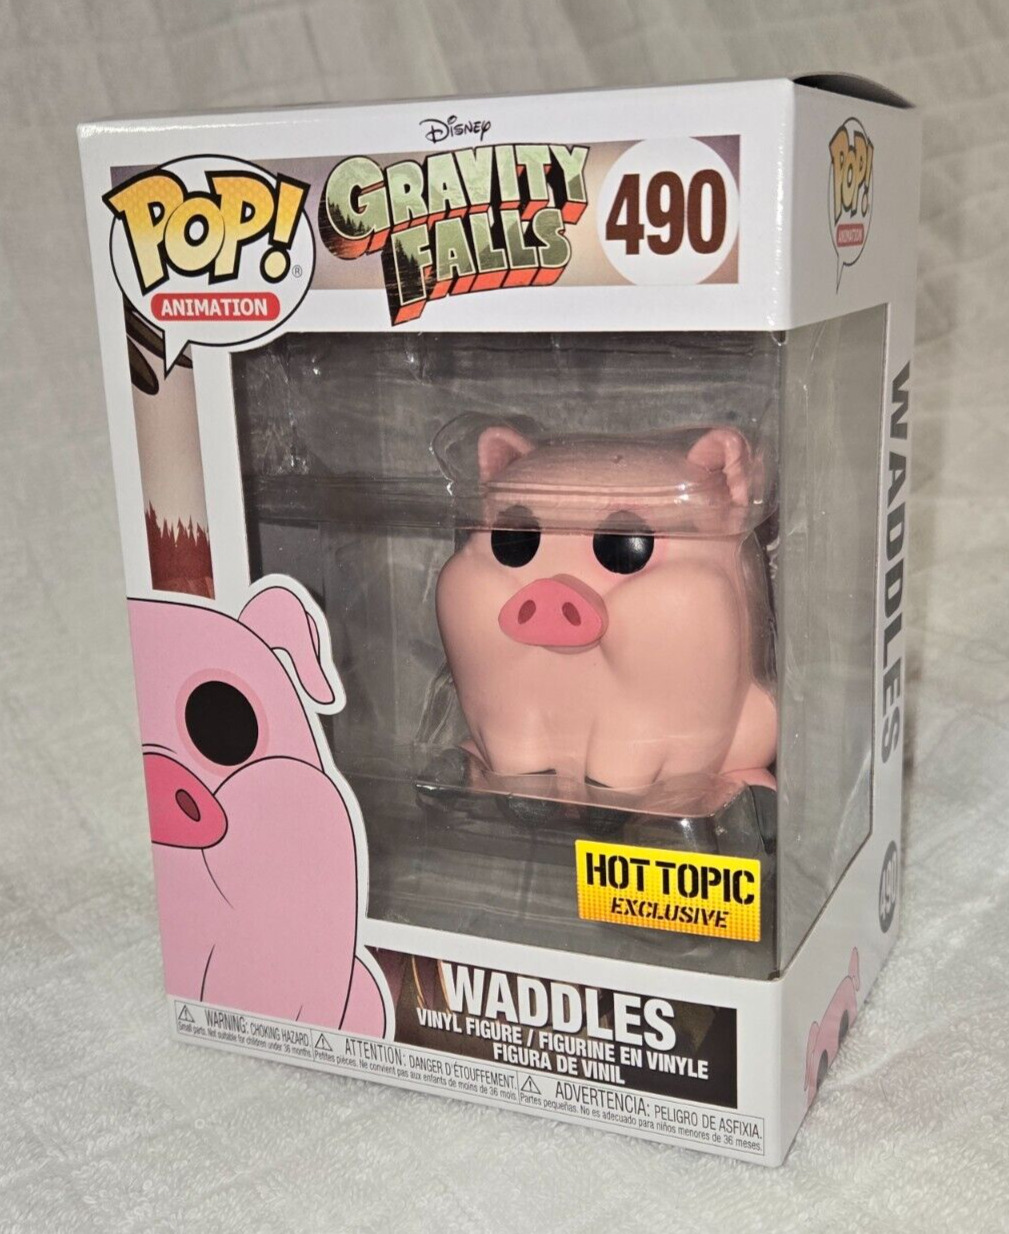 Funko Pop Disney Gravity Falls 490 WADDLES Hot Topic Exclusive Vaulted/Retired